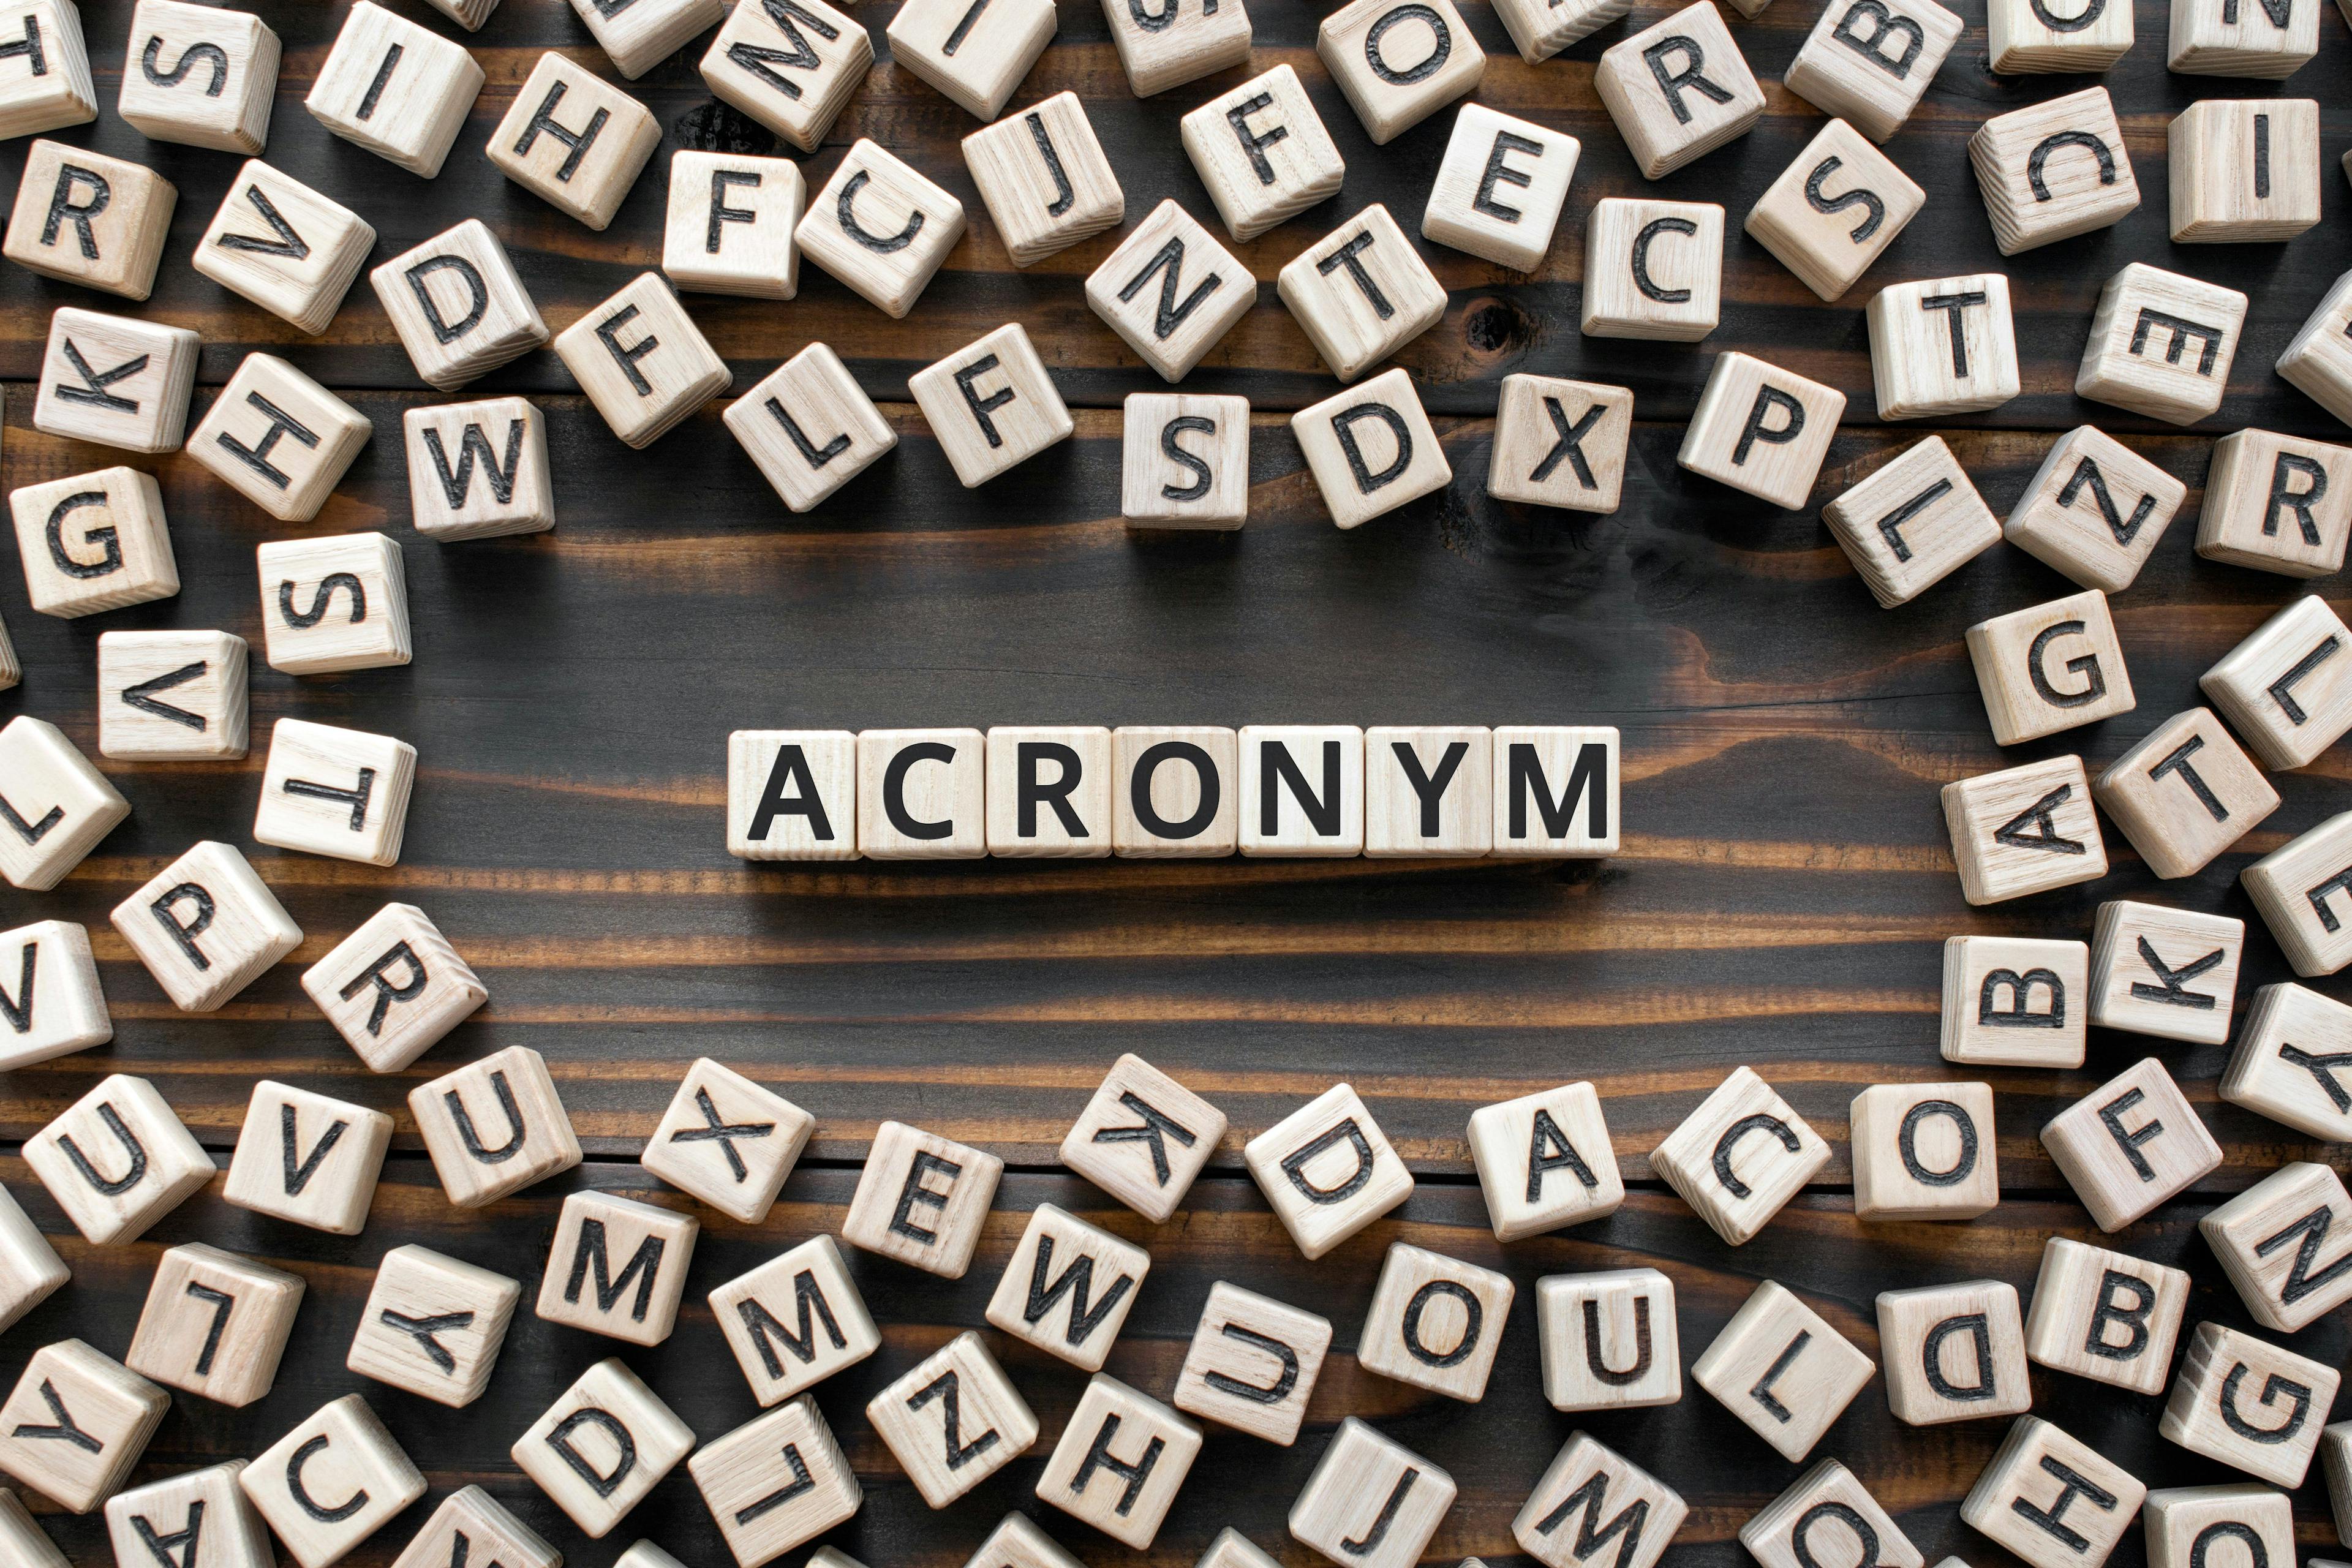 Healthcare crushed by acronyms